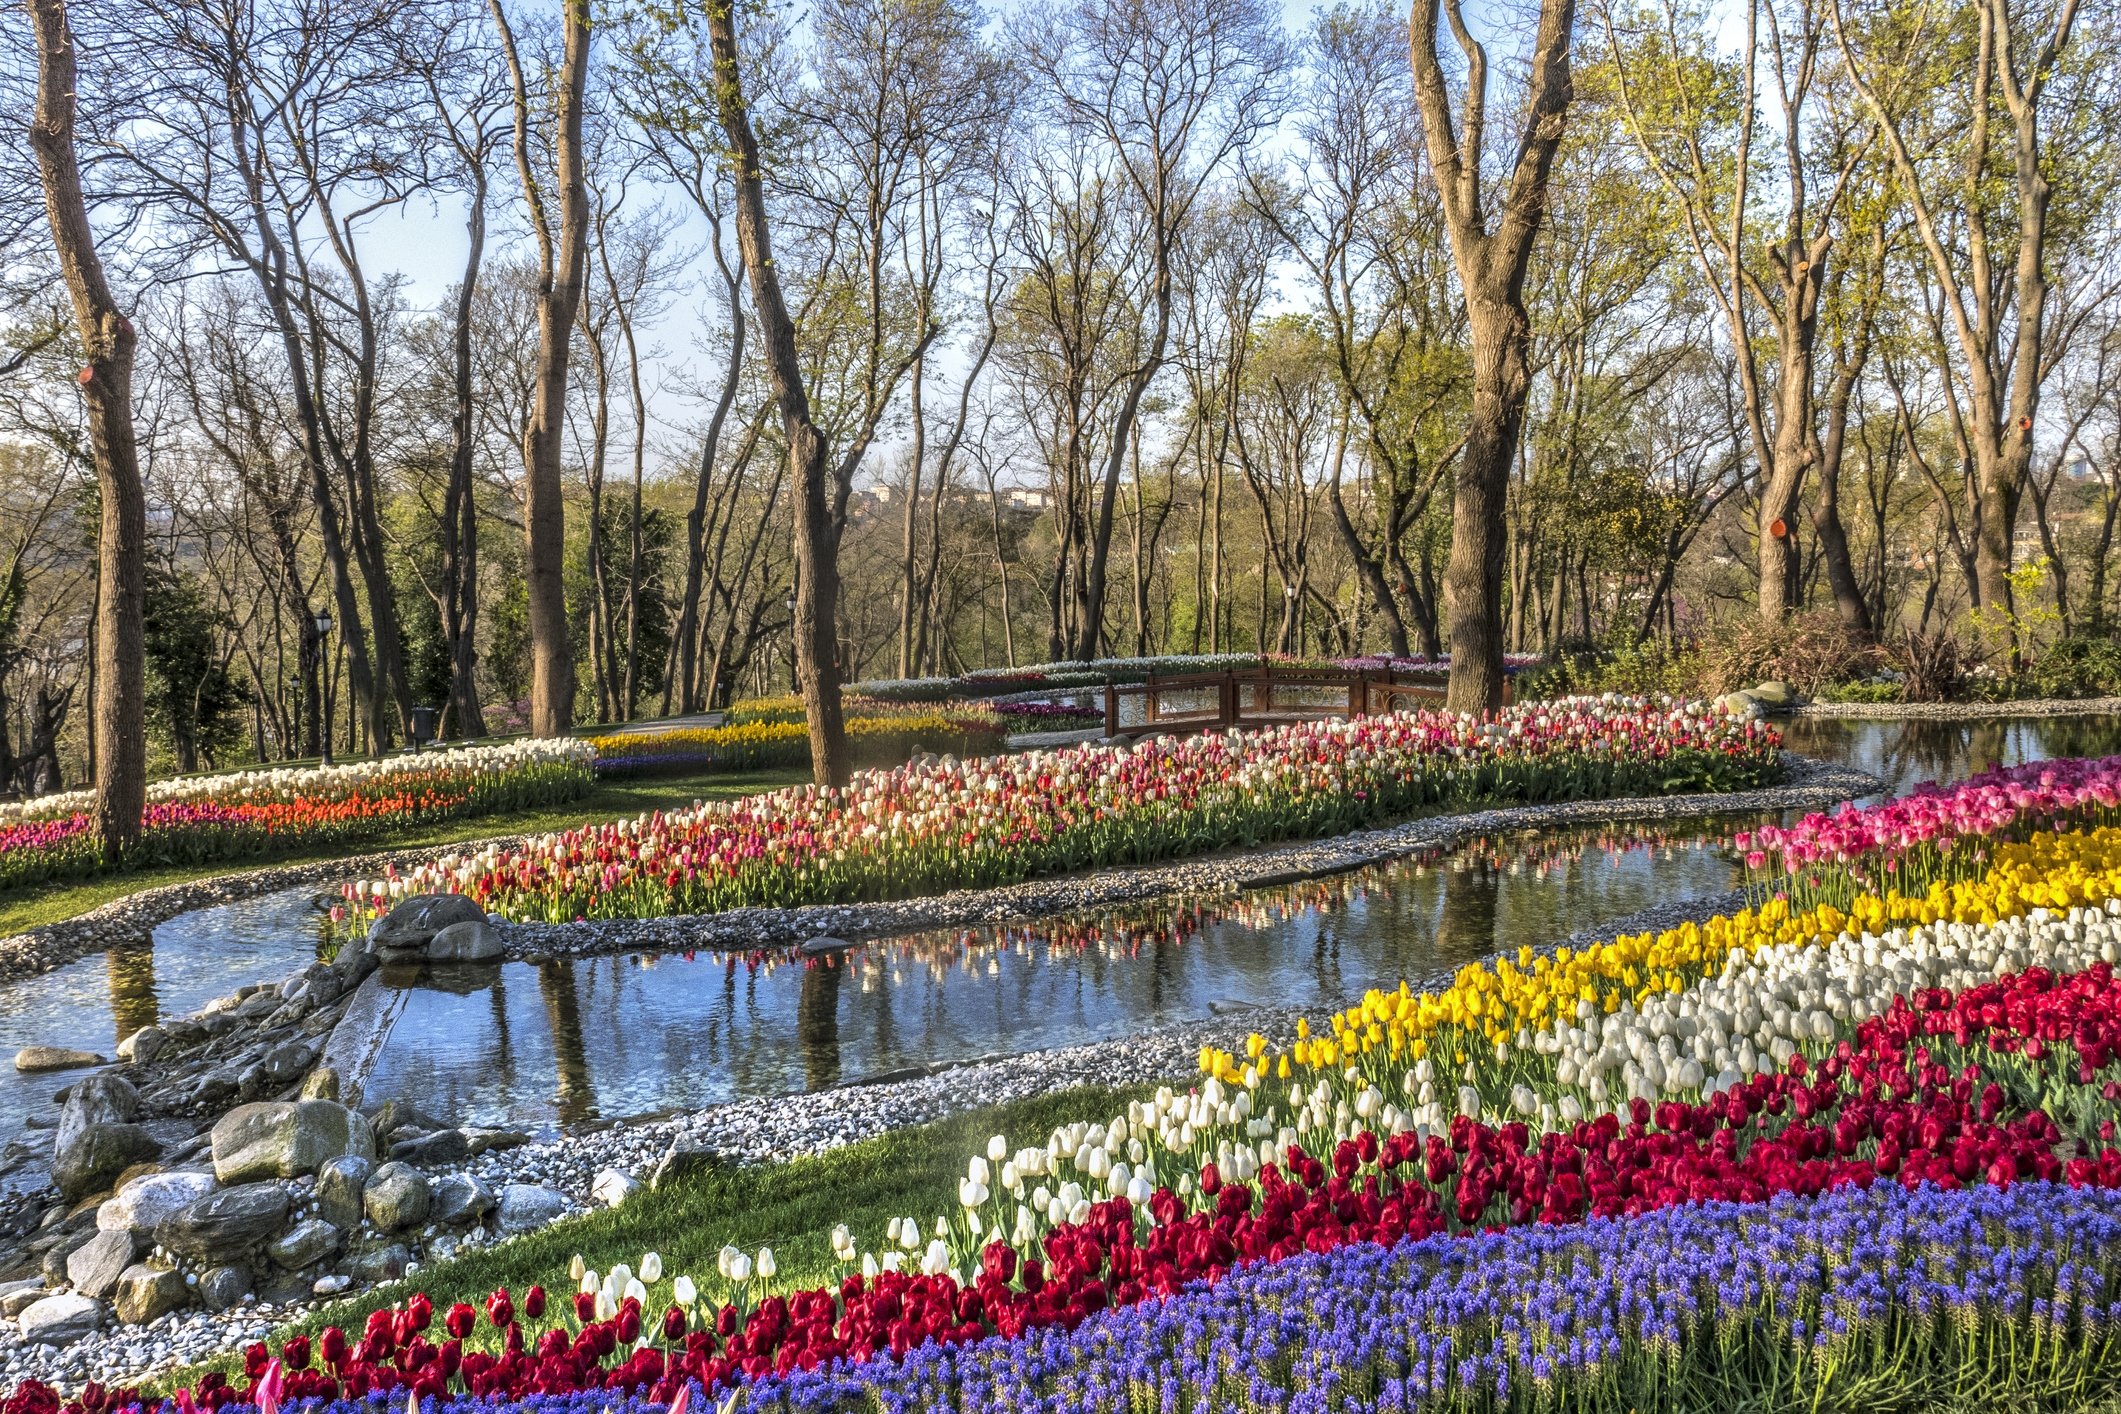 A view of Emirgan Park, a historical urban park adorned with tulips at the Emirgan neighborhood in the Sarıyer district of Istanbul, Turkey.